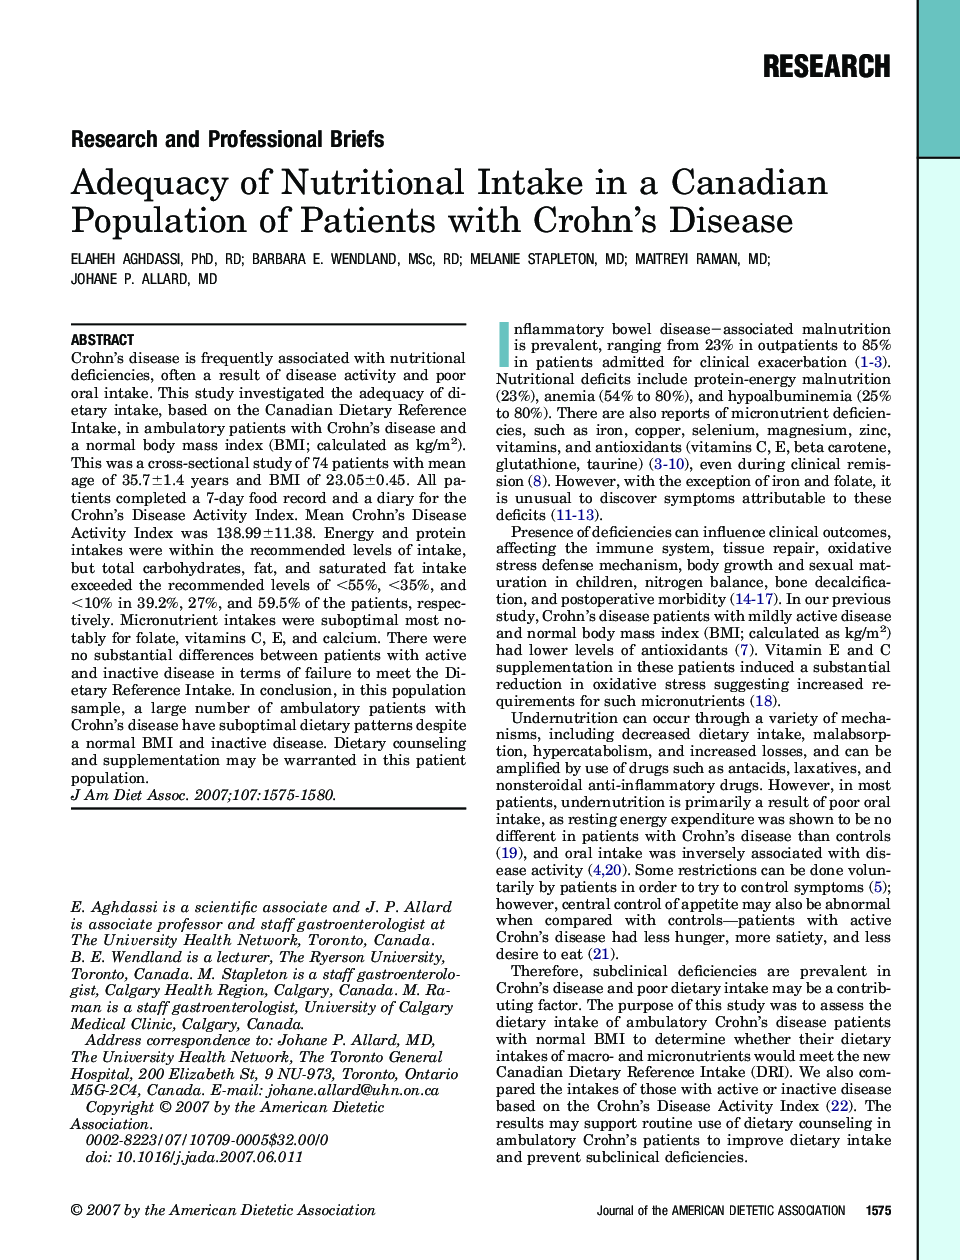 Adequacy of Nutritional Intake in a Canadian Population of Patients with Crohn’s Disease